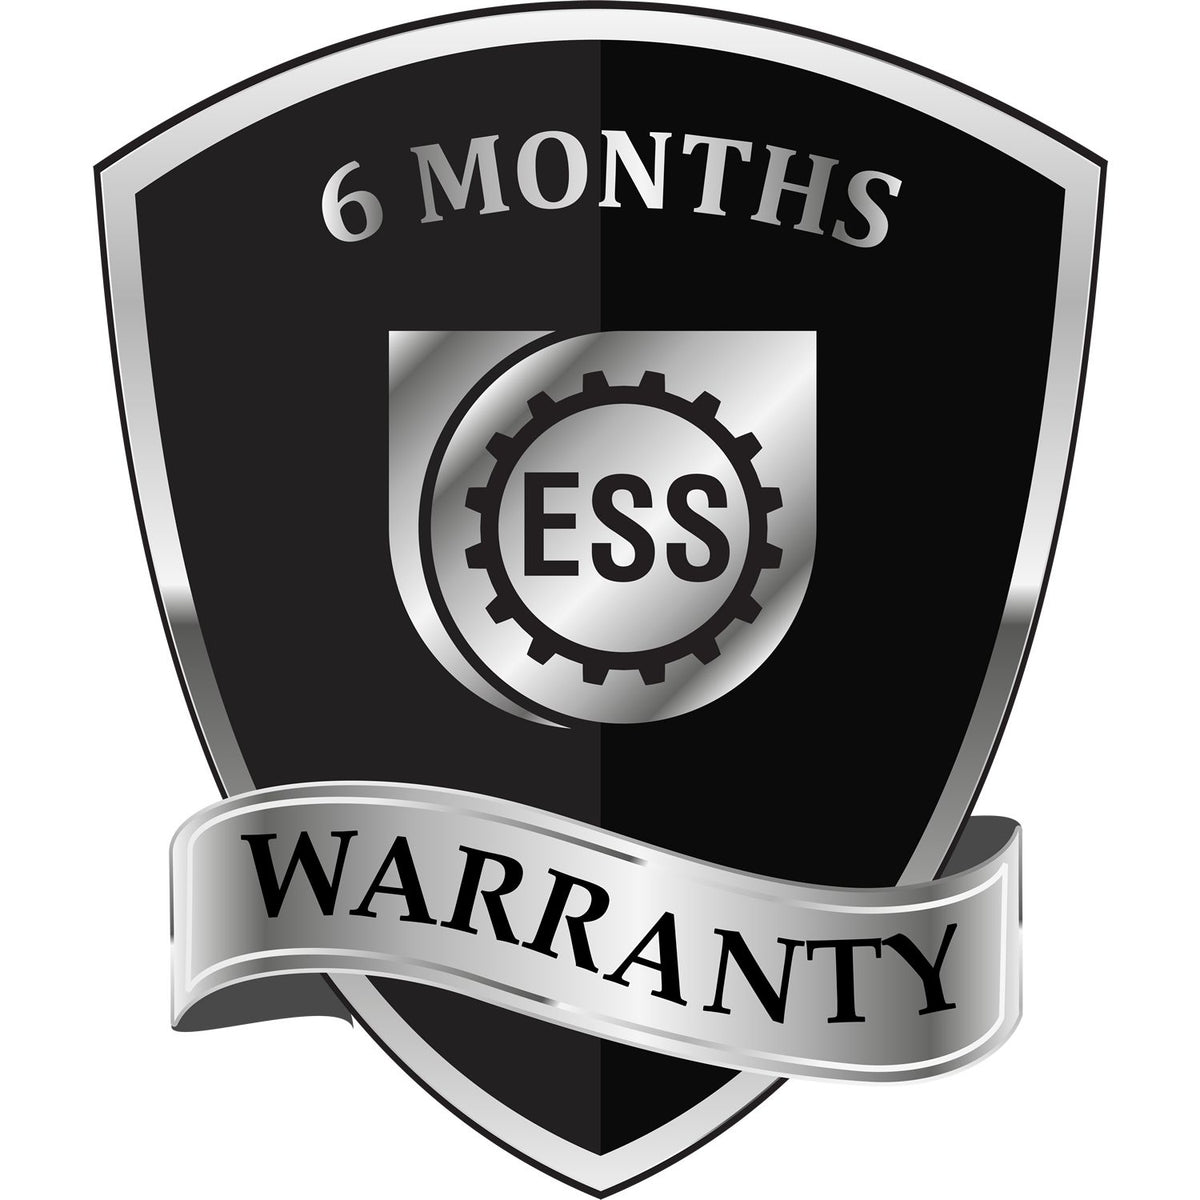 A badge or emblem showing a warranty icon for the Indiana Professional Engineer Seal Stamp